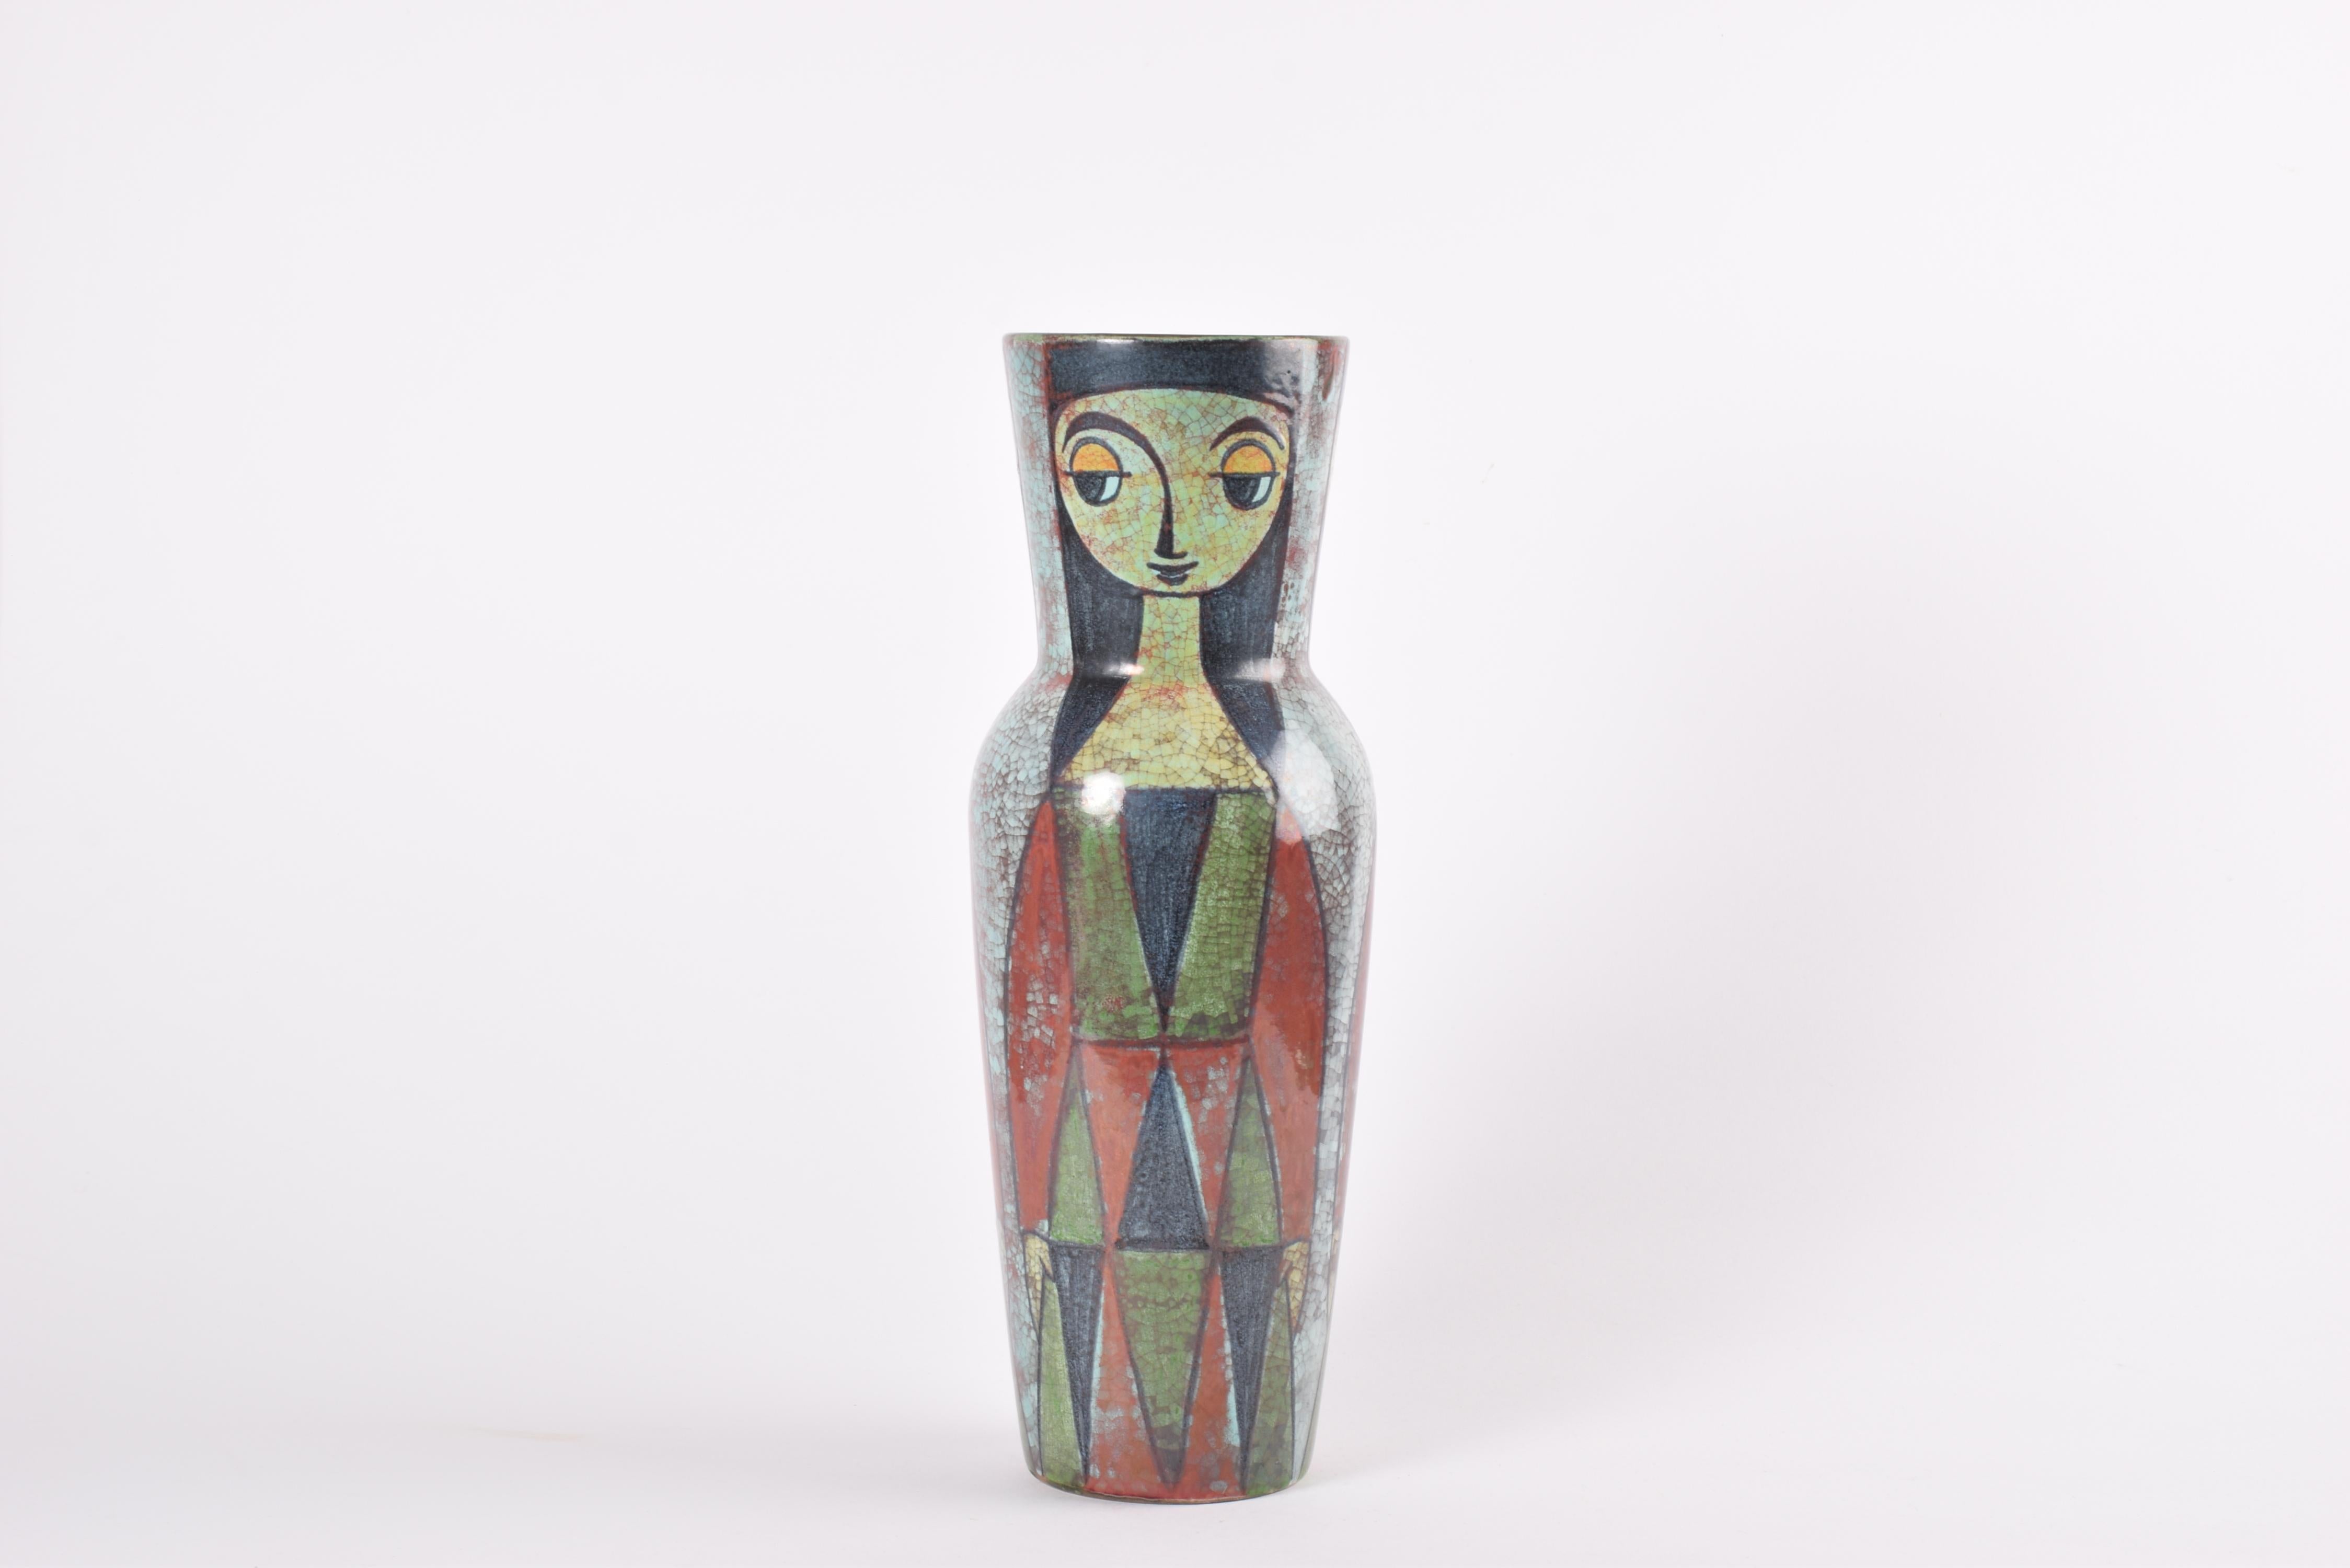 Mid-Century Modern Tall Vase by Marianne Starck for MA&S Persia Glaze Colorful Decor, Danish 1960s For Sale